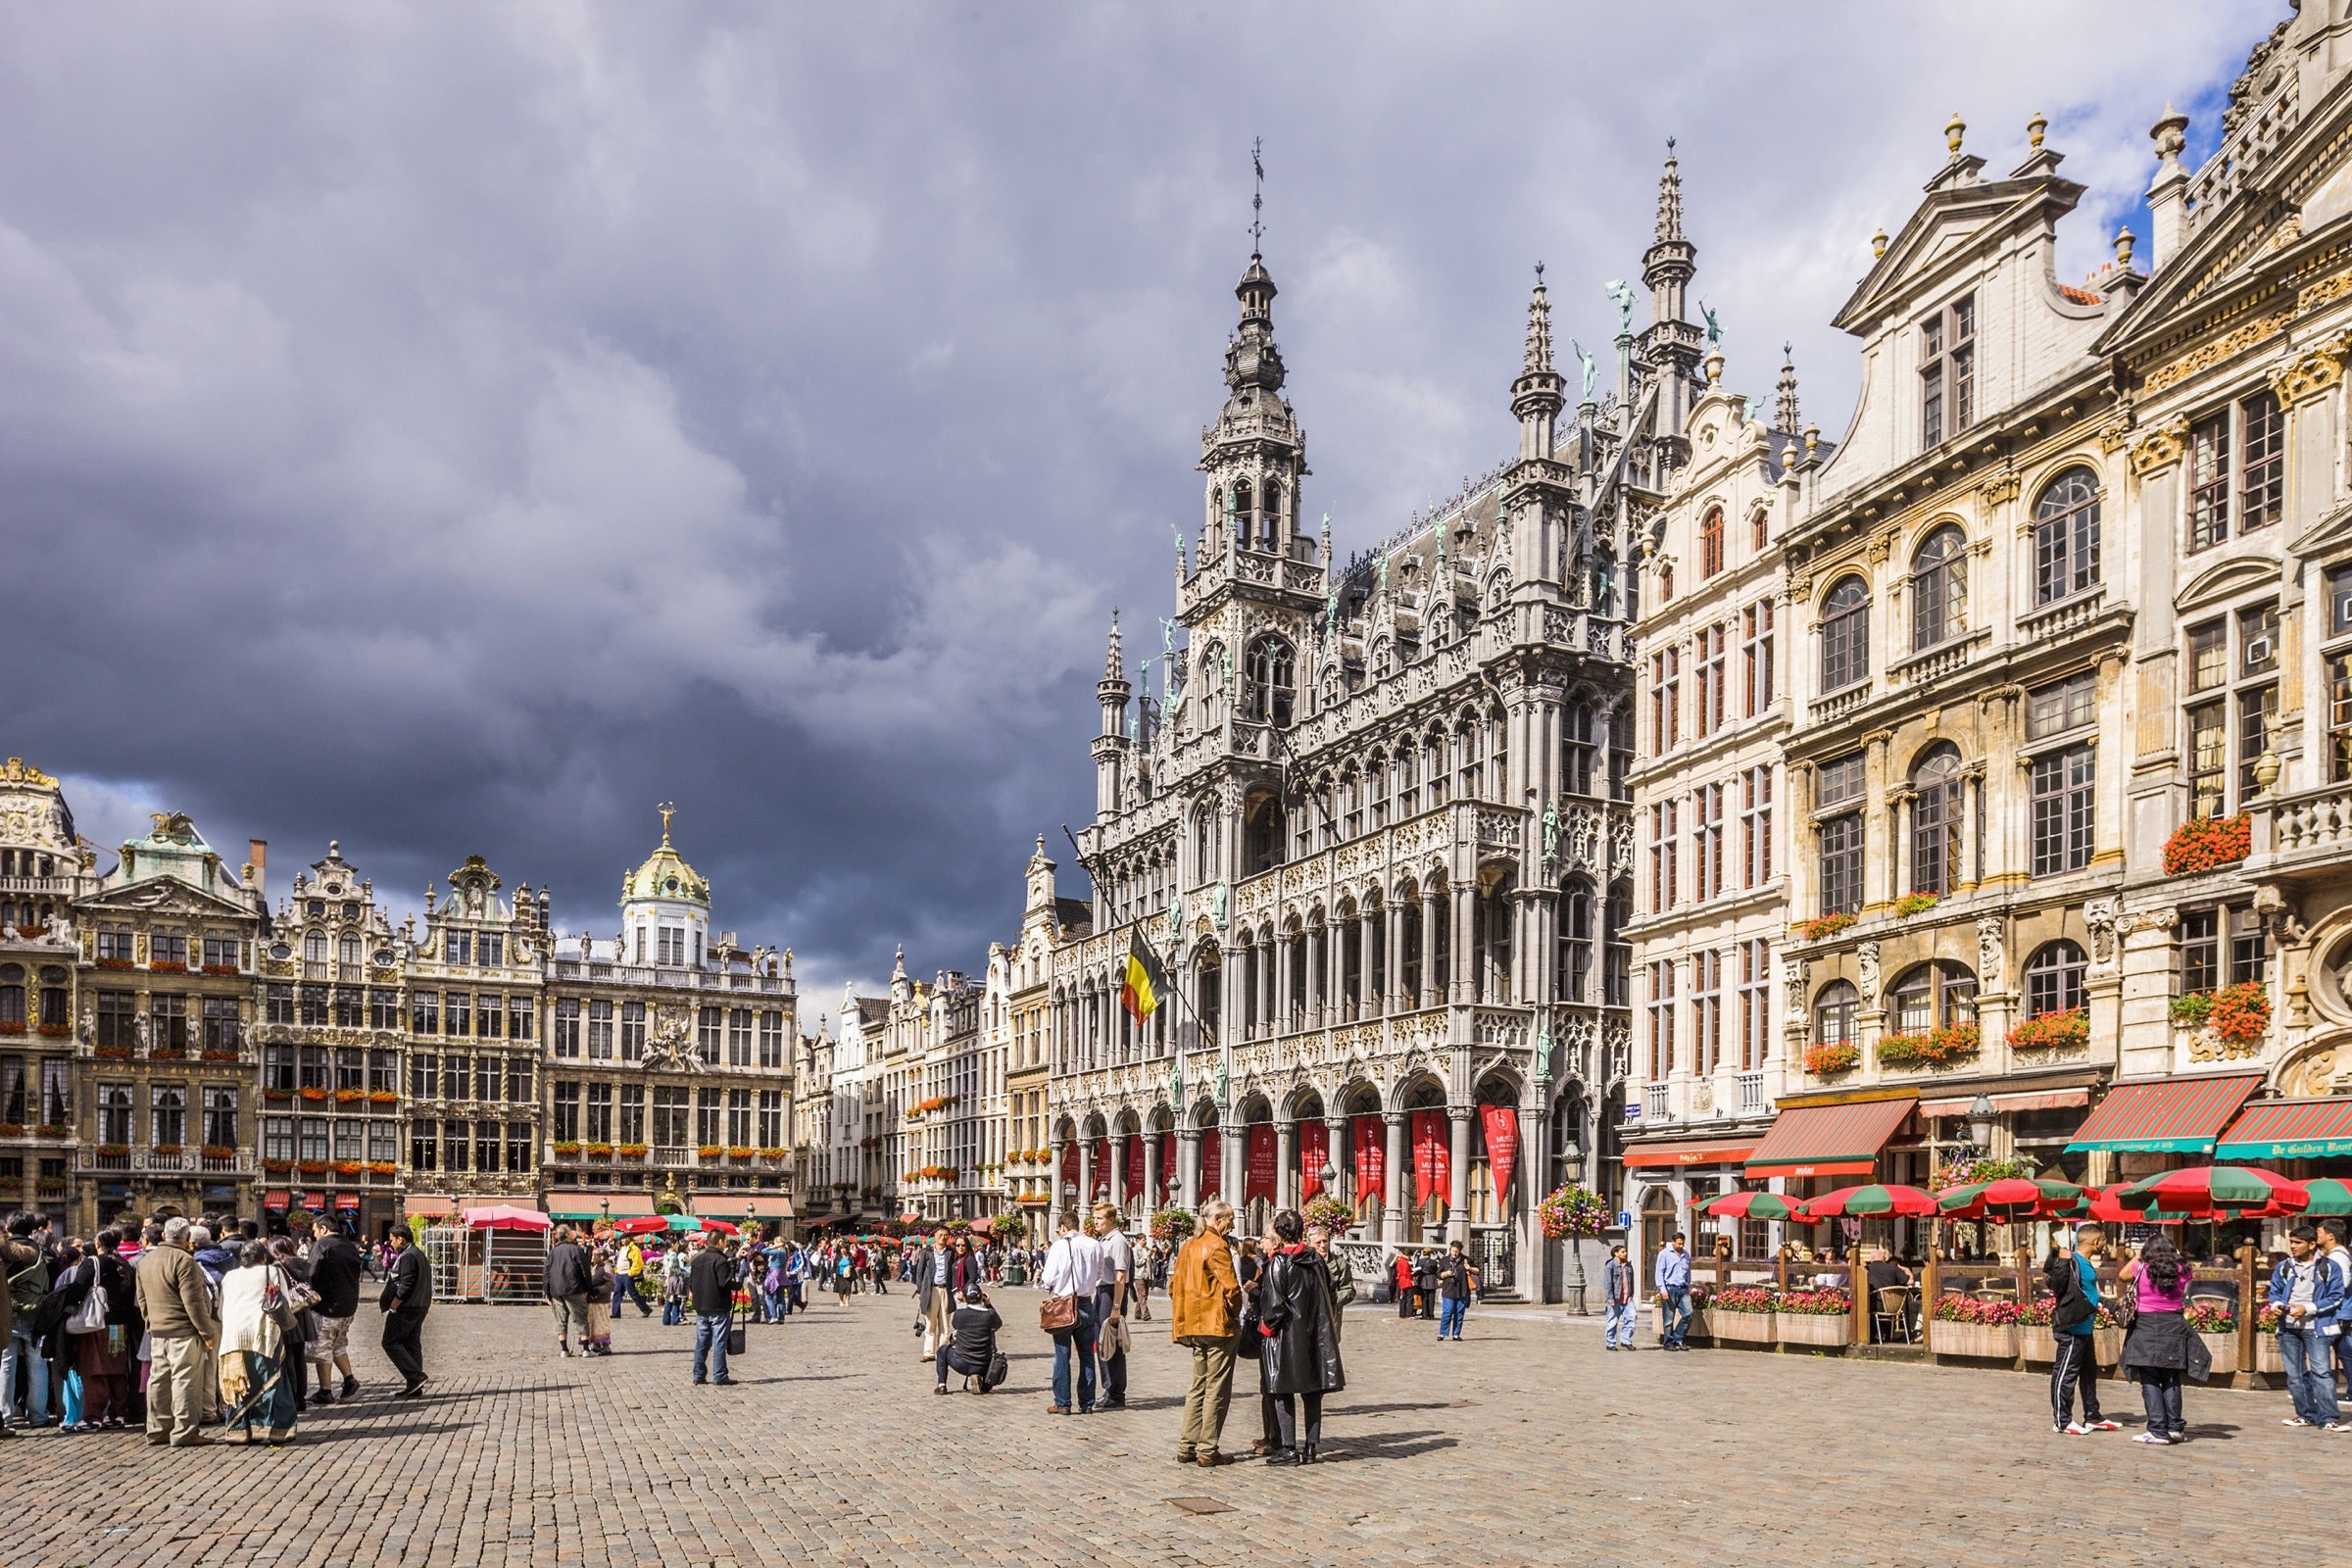 View of the Grand Place in Brussels